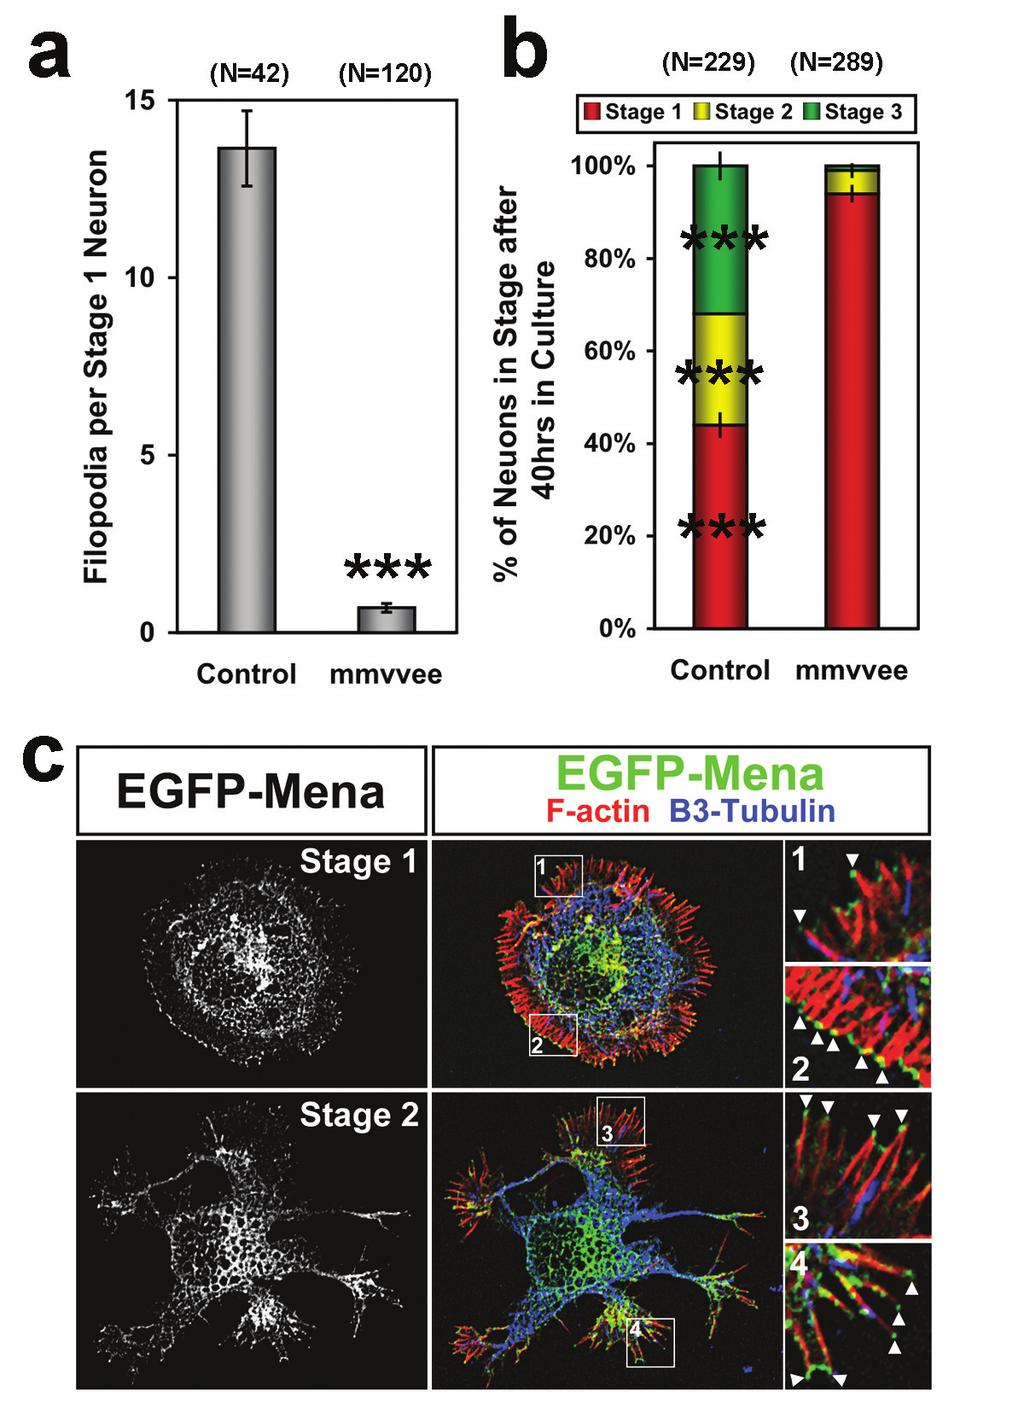 Figure S1. Loss of Ena/VASP proteins inhibits filopodia and neuritogenesis. (a) Bar graph of filopodia number per stage 1 control and mmvvee (Mena/ VASP/EVL-null) neurons at 40hrs in culture.